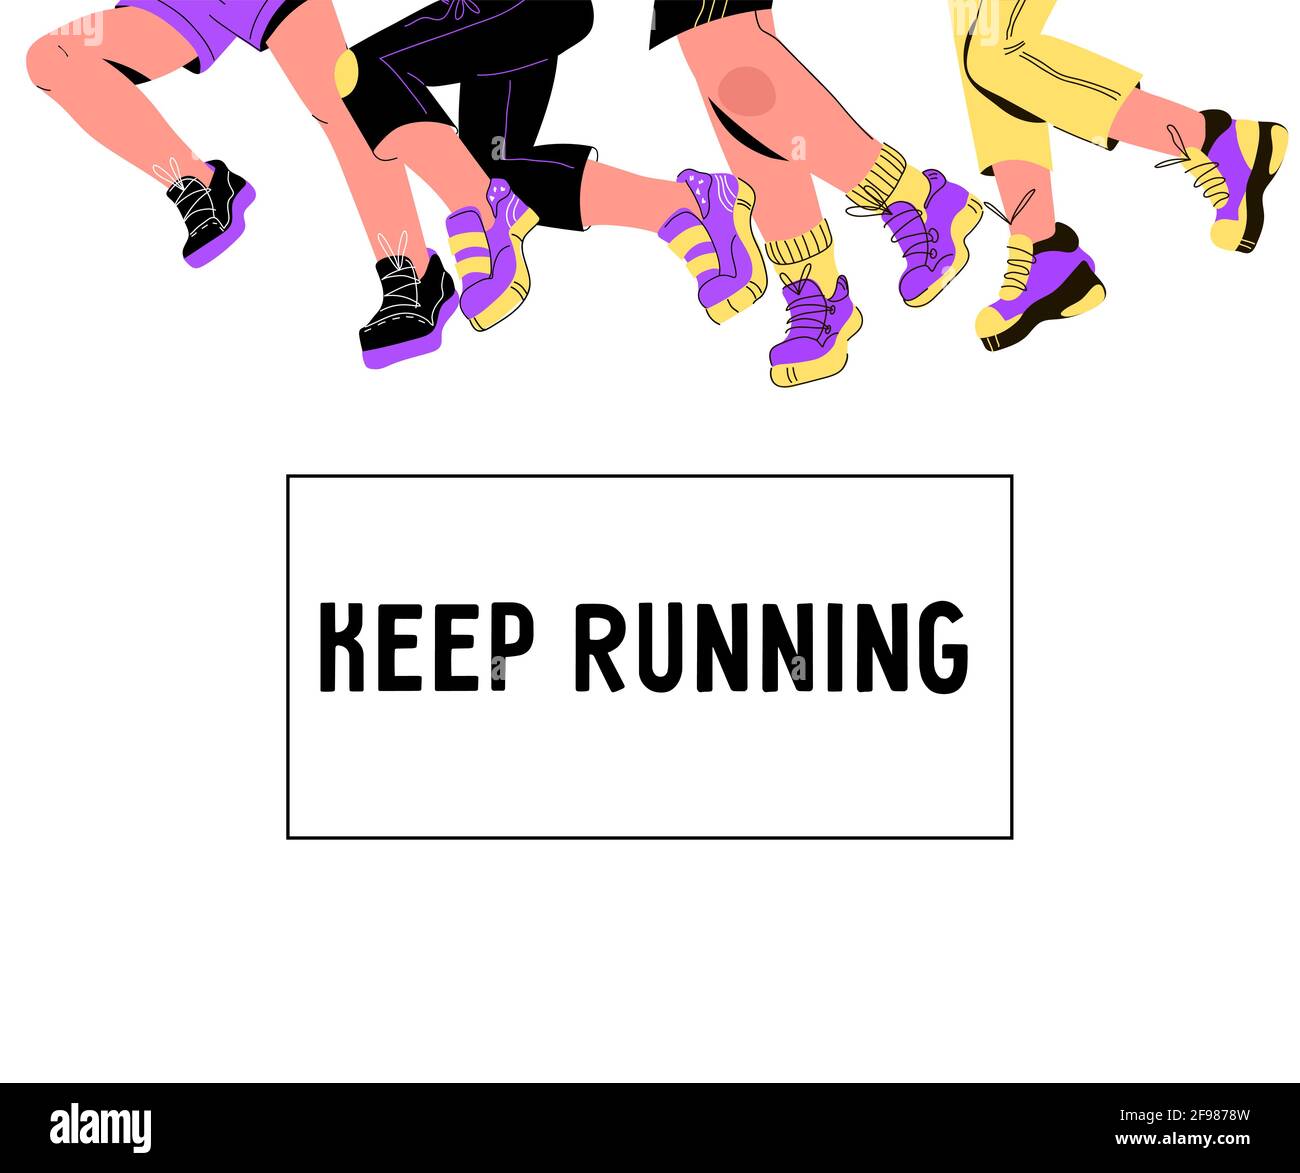 Keep running banner idea with legs of runners in sport shoes, cartoon vector illustration. Run competition or marathon bright colorful banner or poste Stock Vector